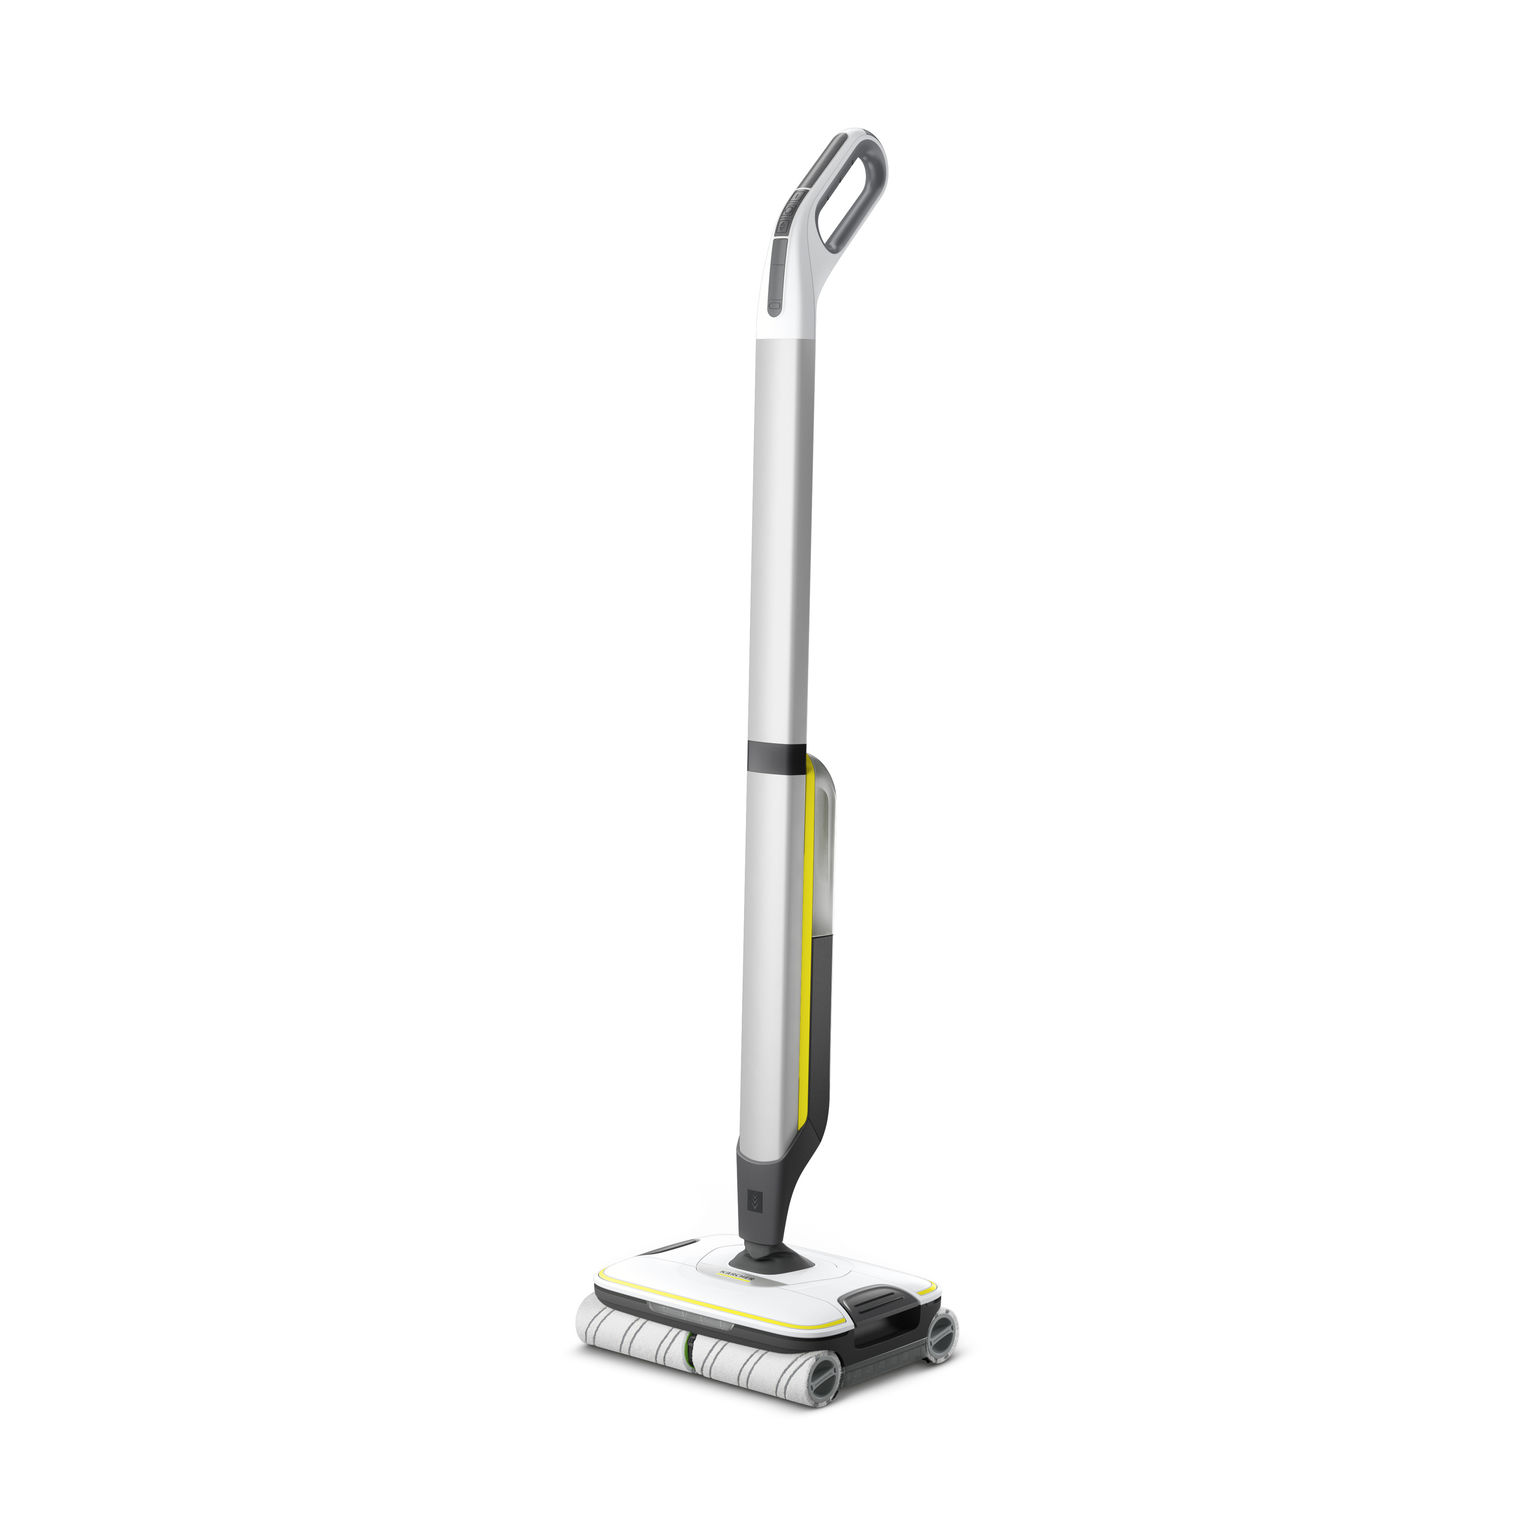 Have a question about Karcher FC 7 Cordless Automatic Hard Floor